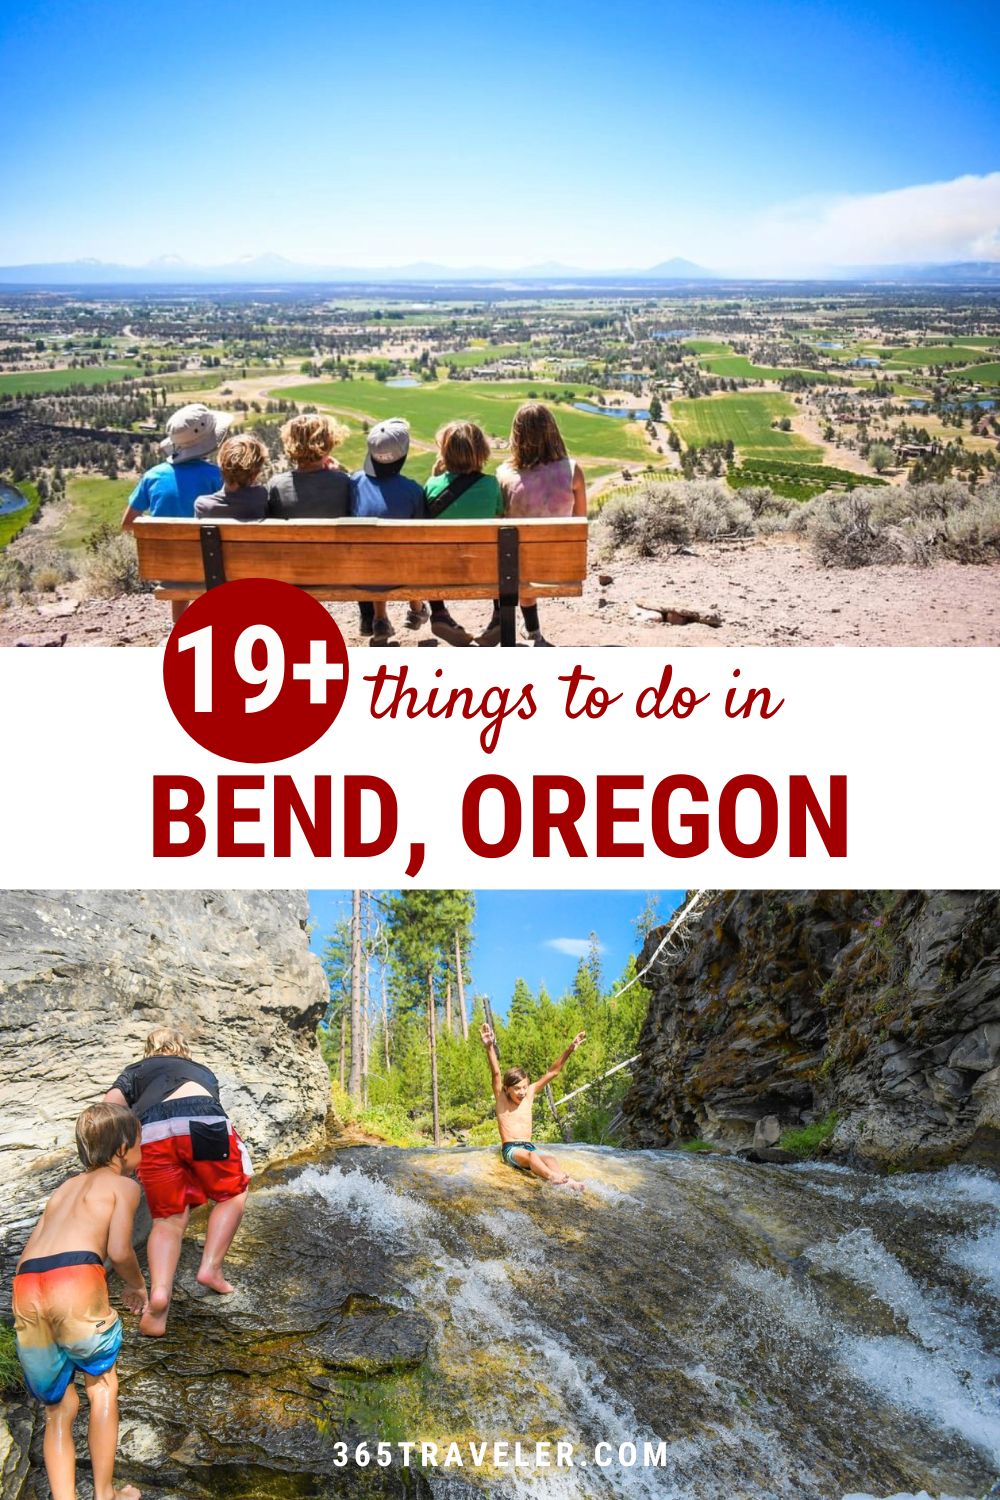 19+ AMAZING THINGS TO DO IN BEND OREGON FOR OUTDOOR-LOVERS